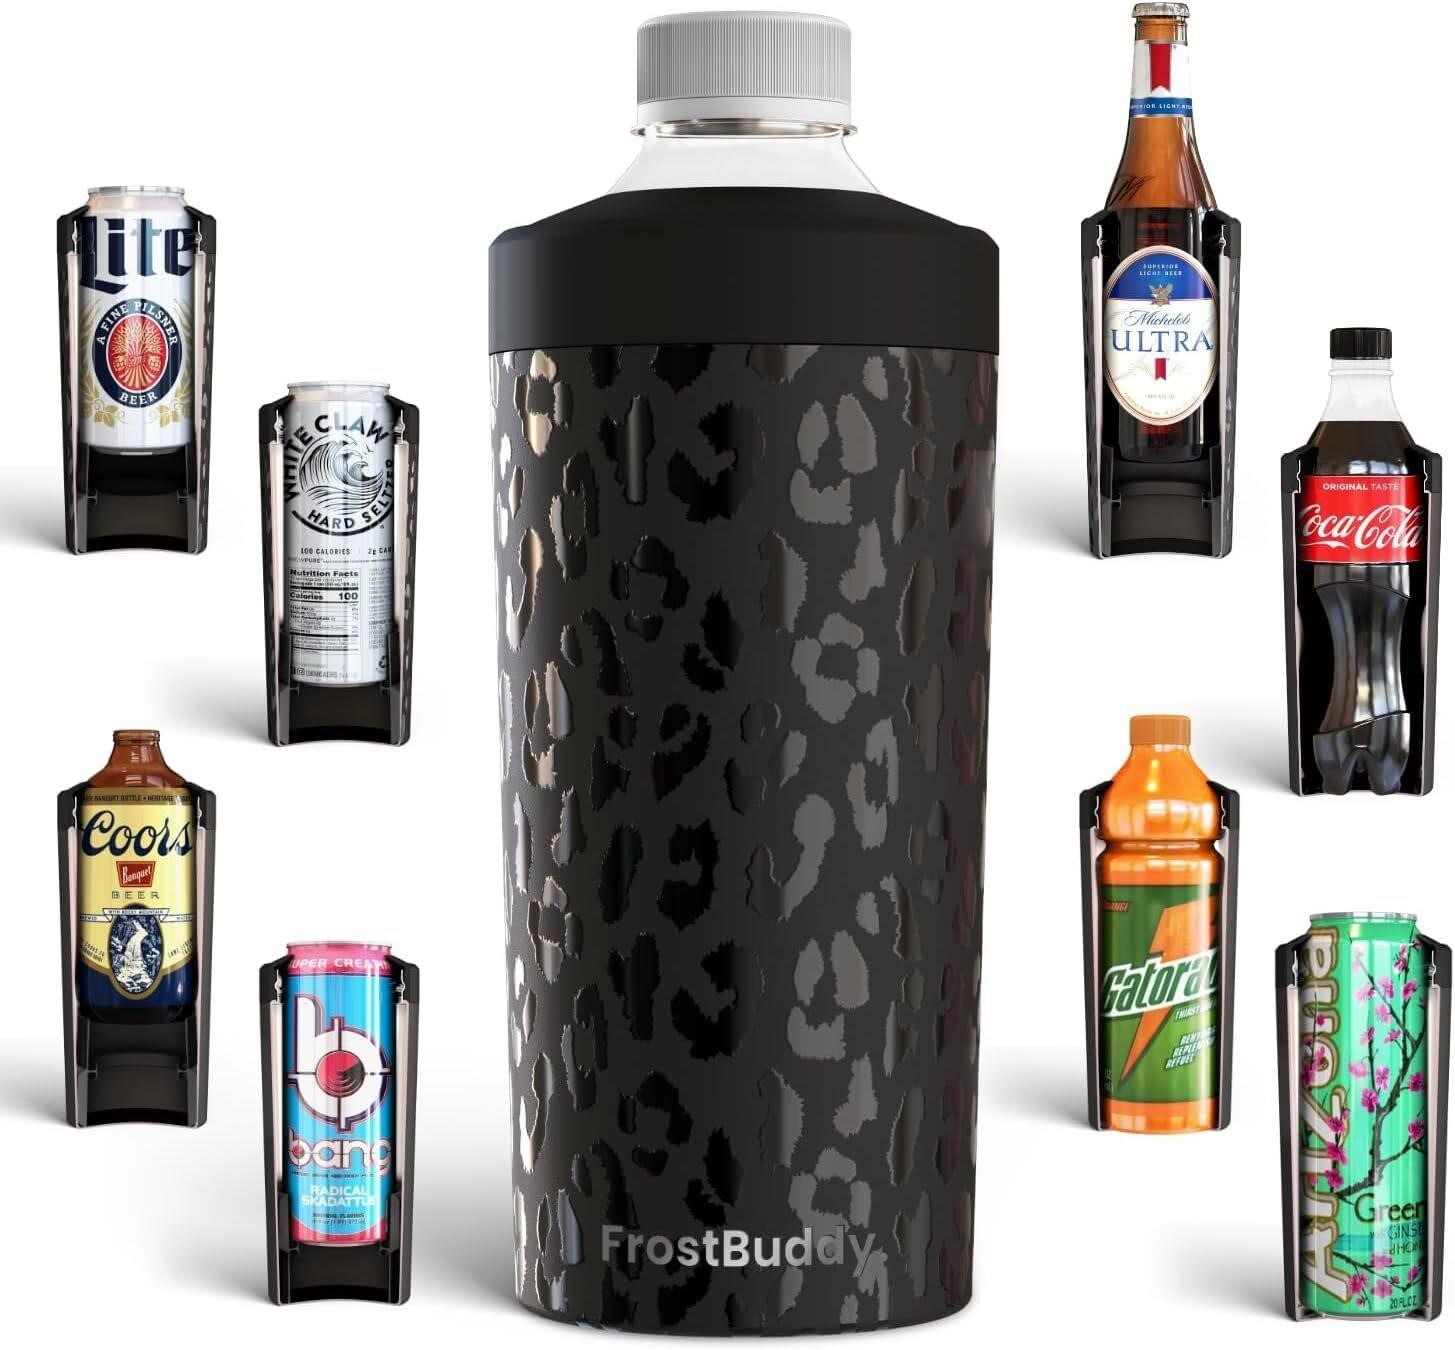 Universal Buddy XL Can Cooler by Frost Buddy